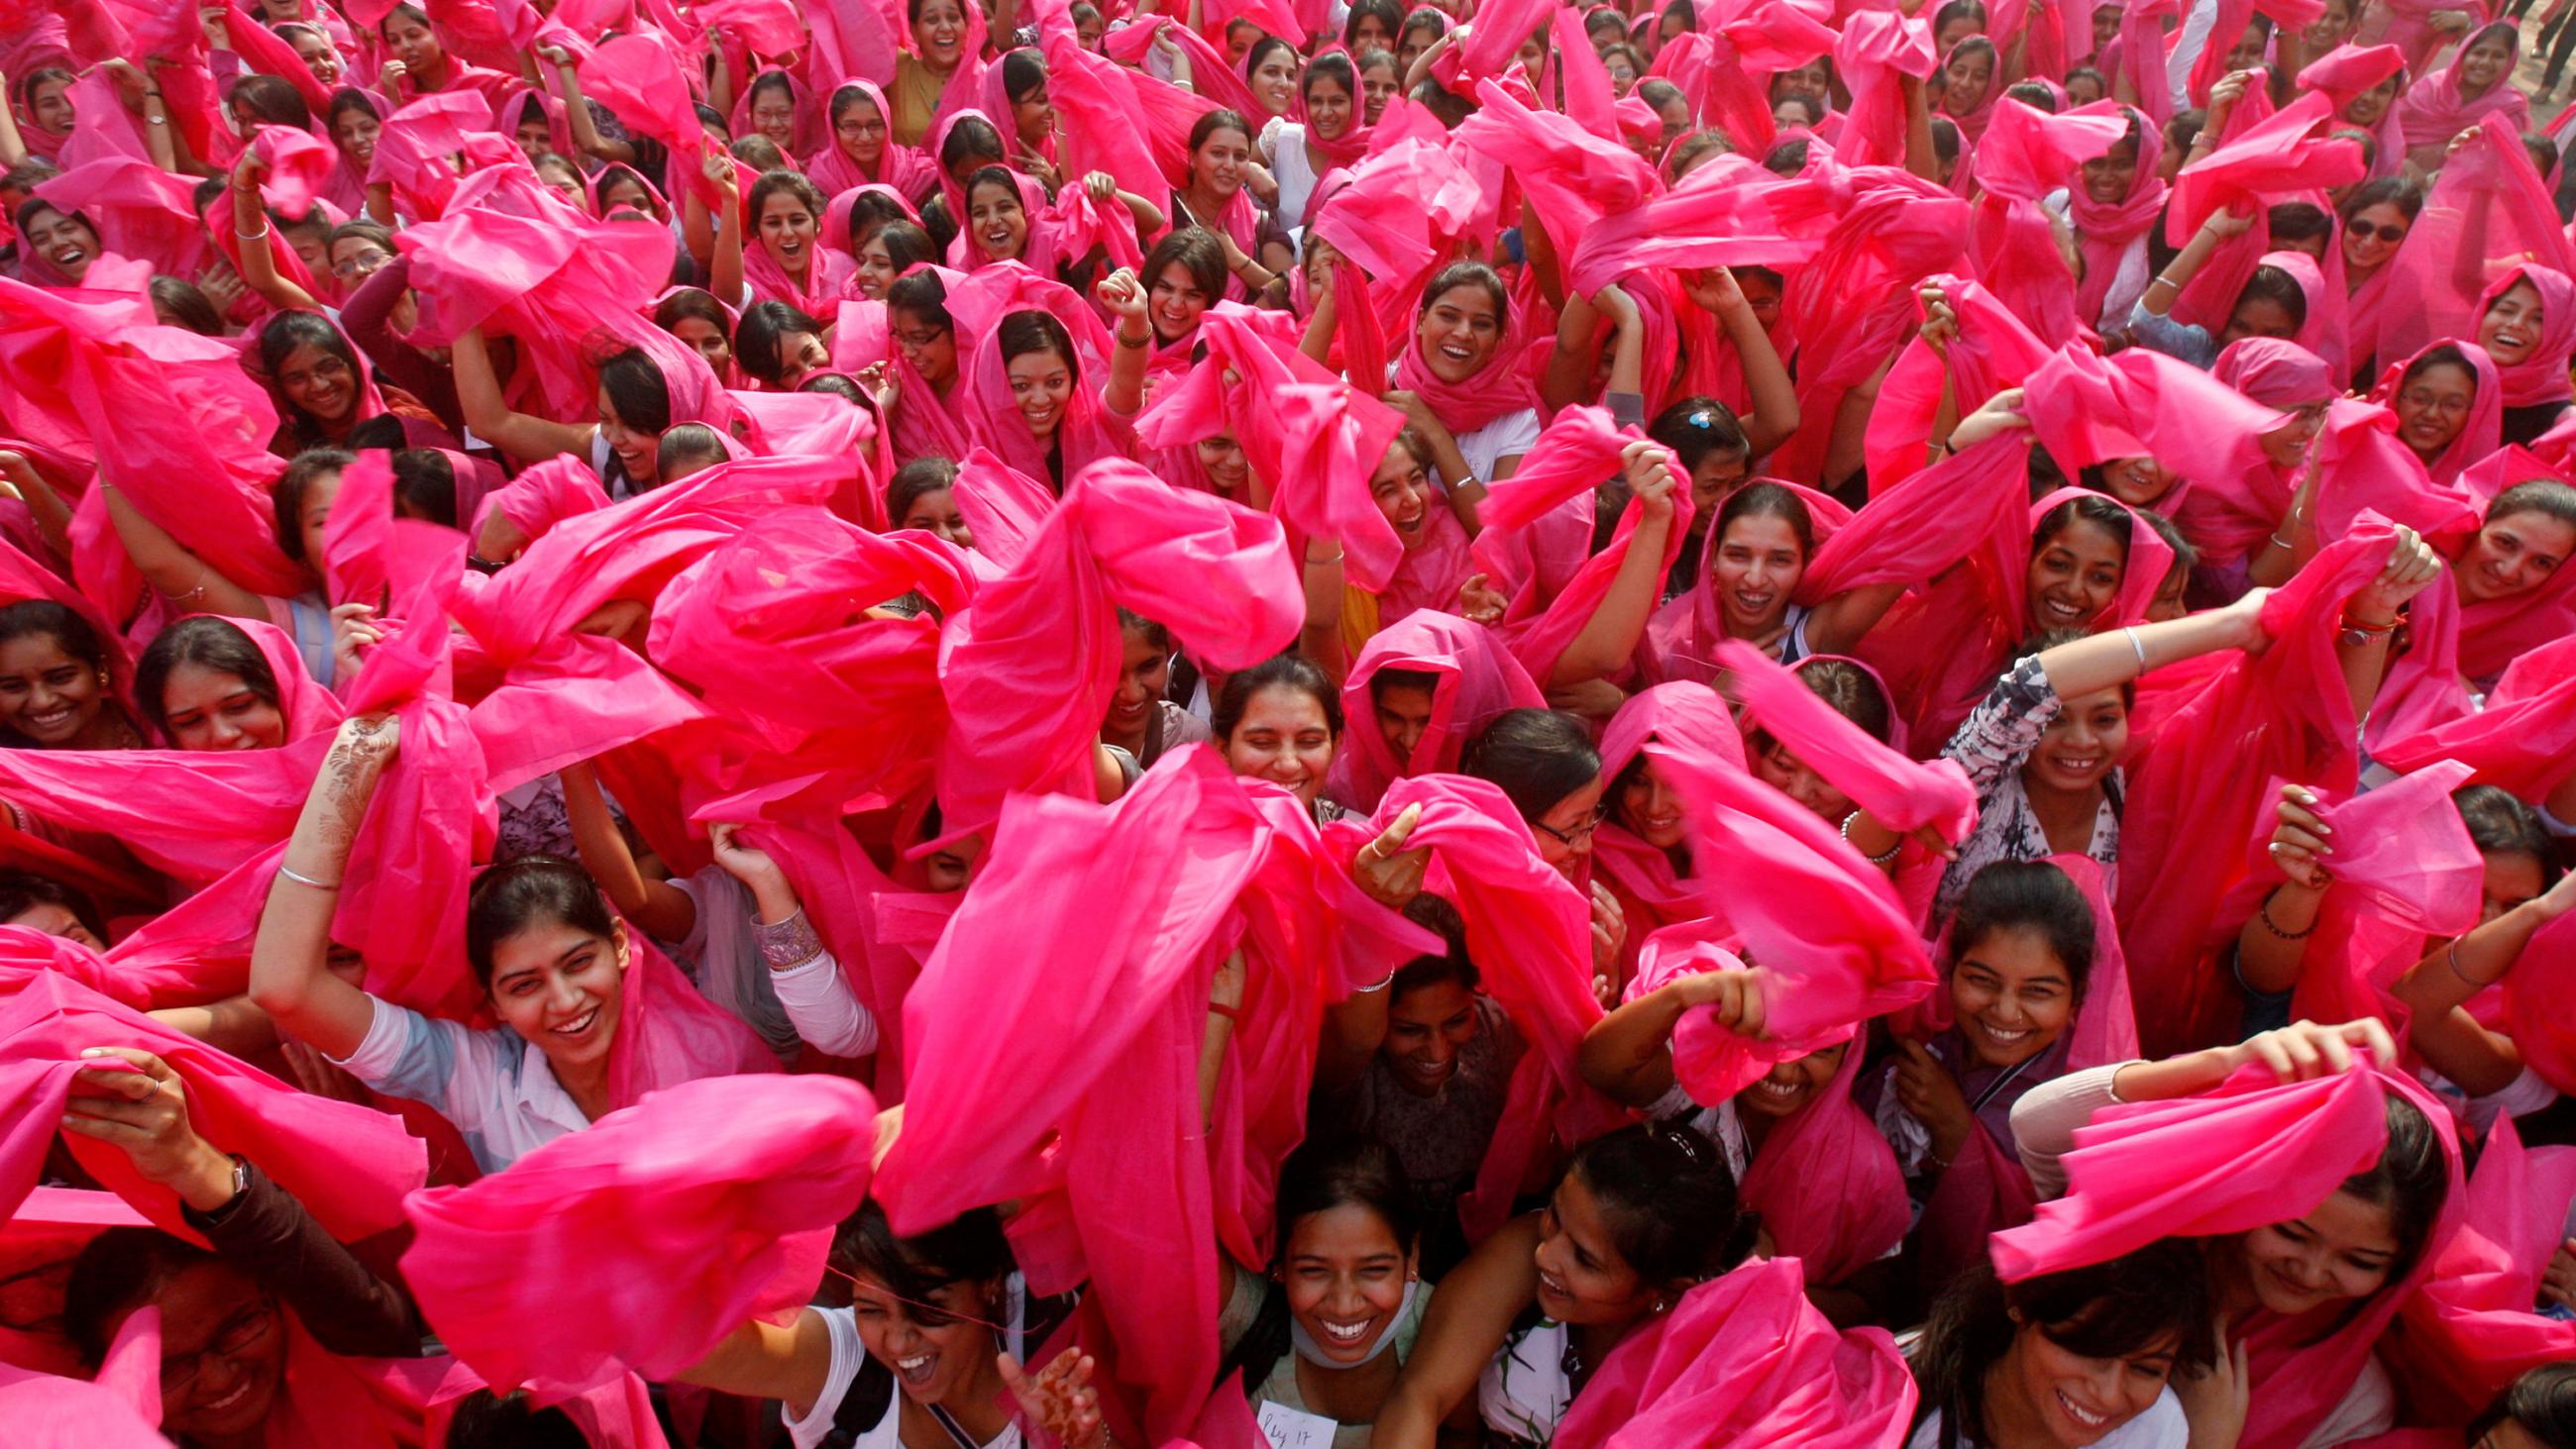 The photo shows a large crowd of women waving pink scarves. 